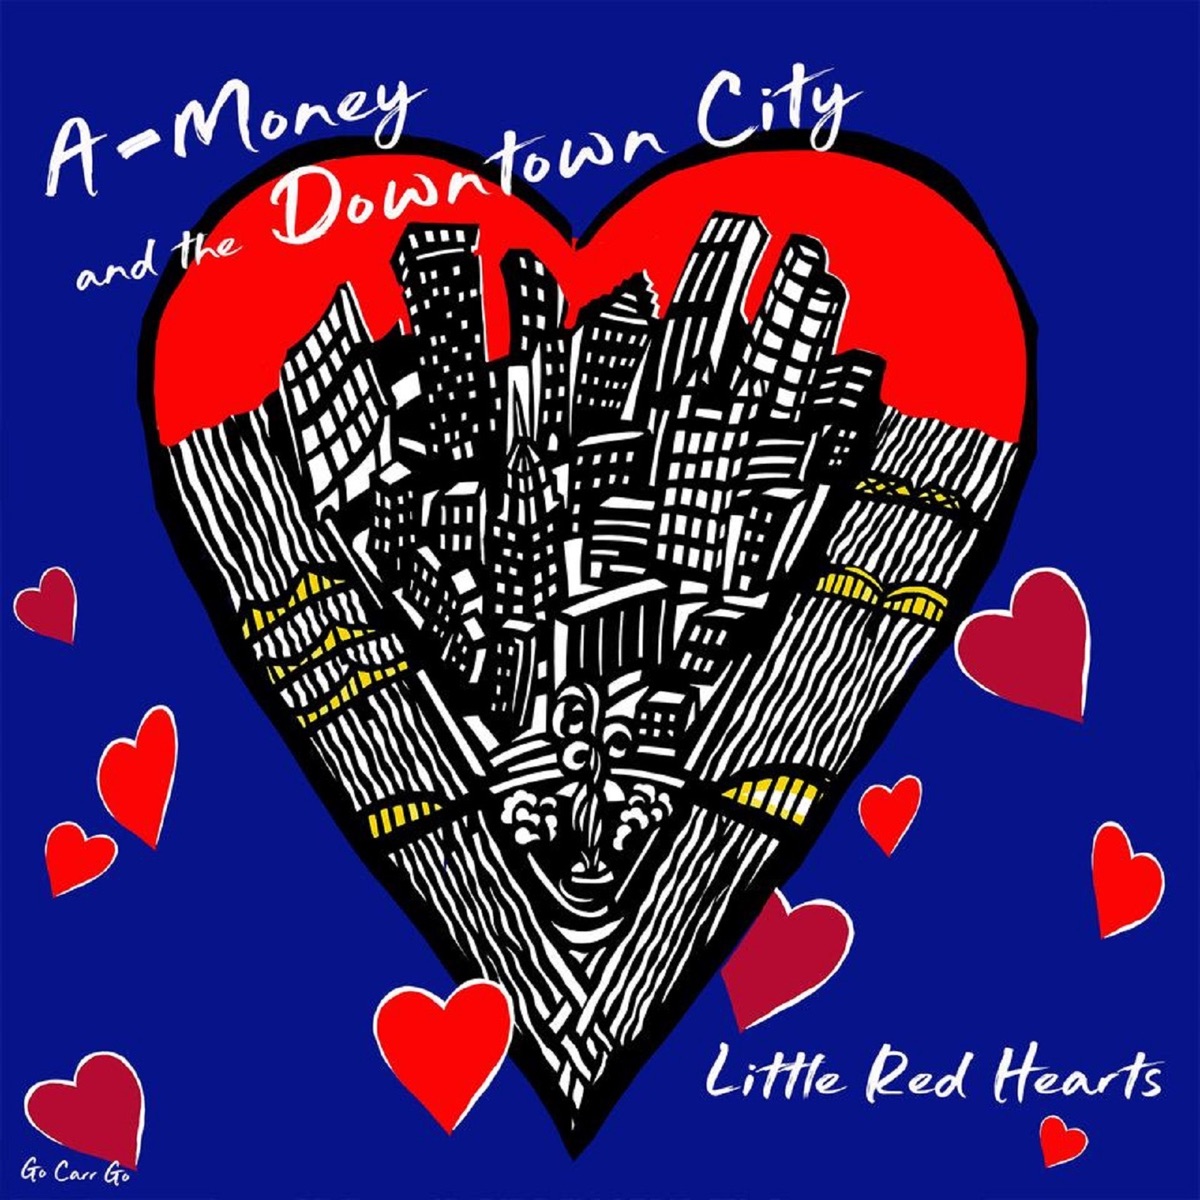 True Love Will Find You In the End - Single - Album by A-Money